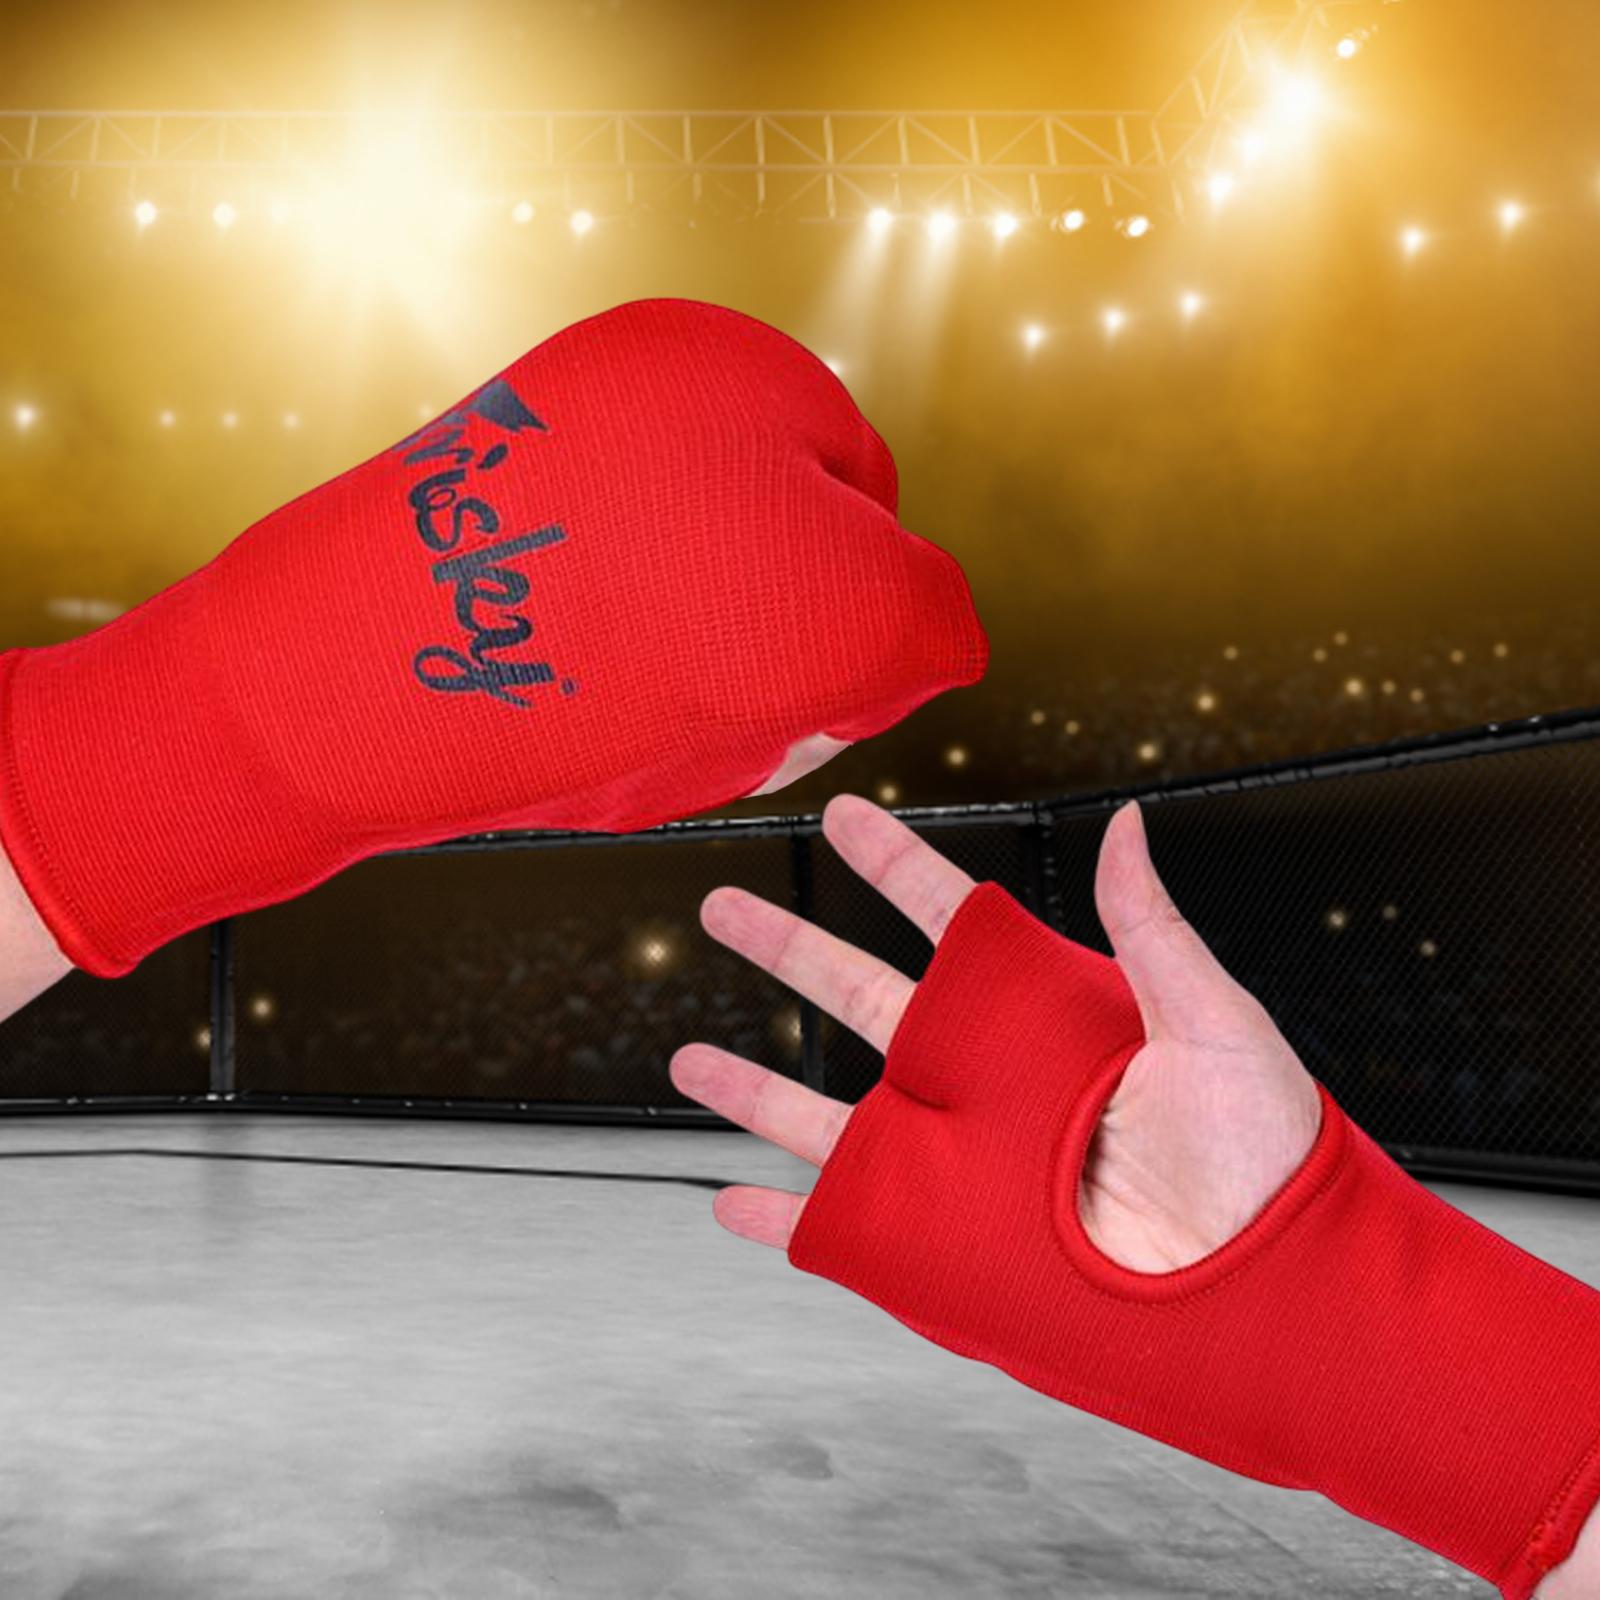 Elastic Hand Wraps Comfortable Inner Gloves for Boxing for Martial Arts Red with XS